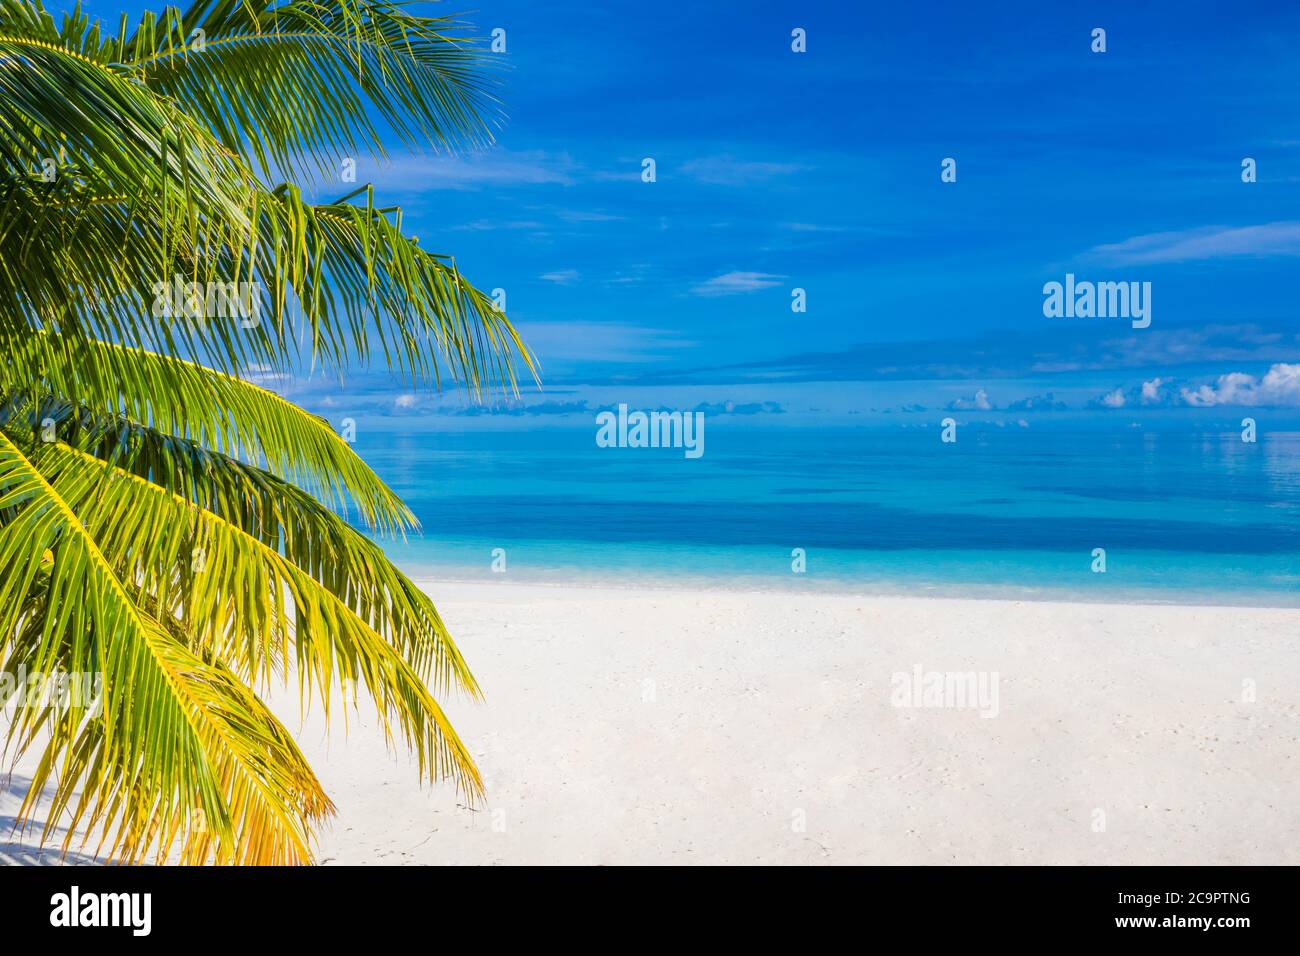 Beautiful palm beach, seascape. Summer holiday and vacation concept background. Inspirational tropical landscape design. Tourism and travel design Stock Photo